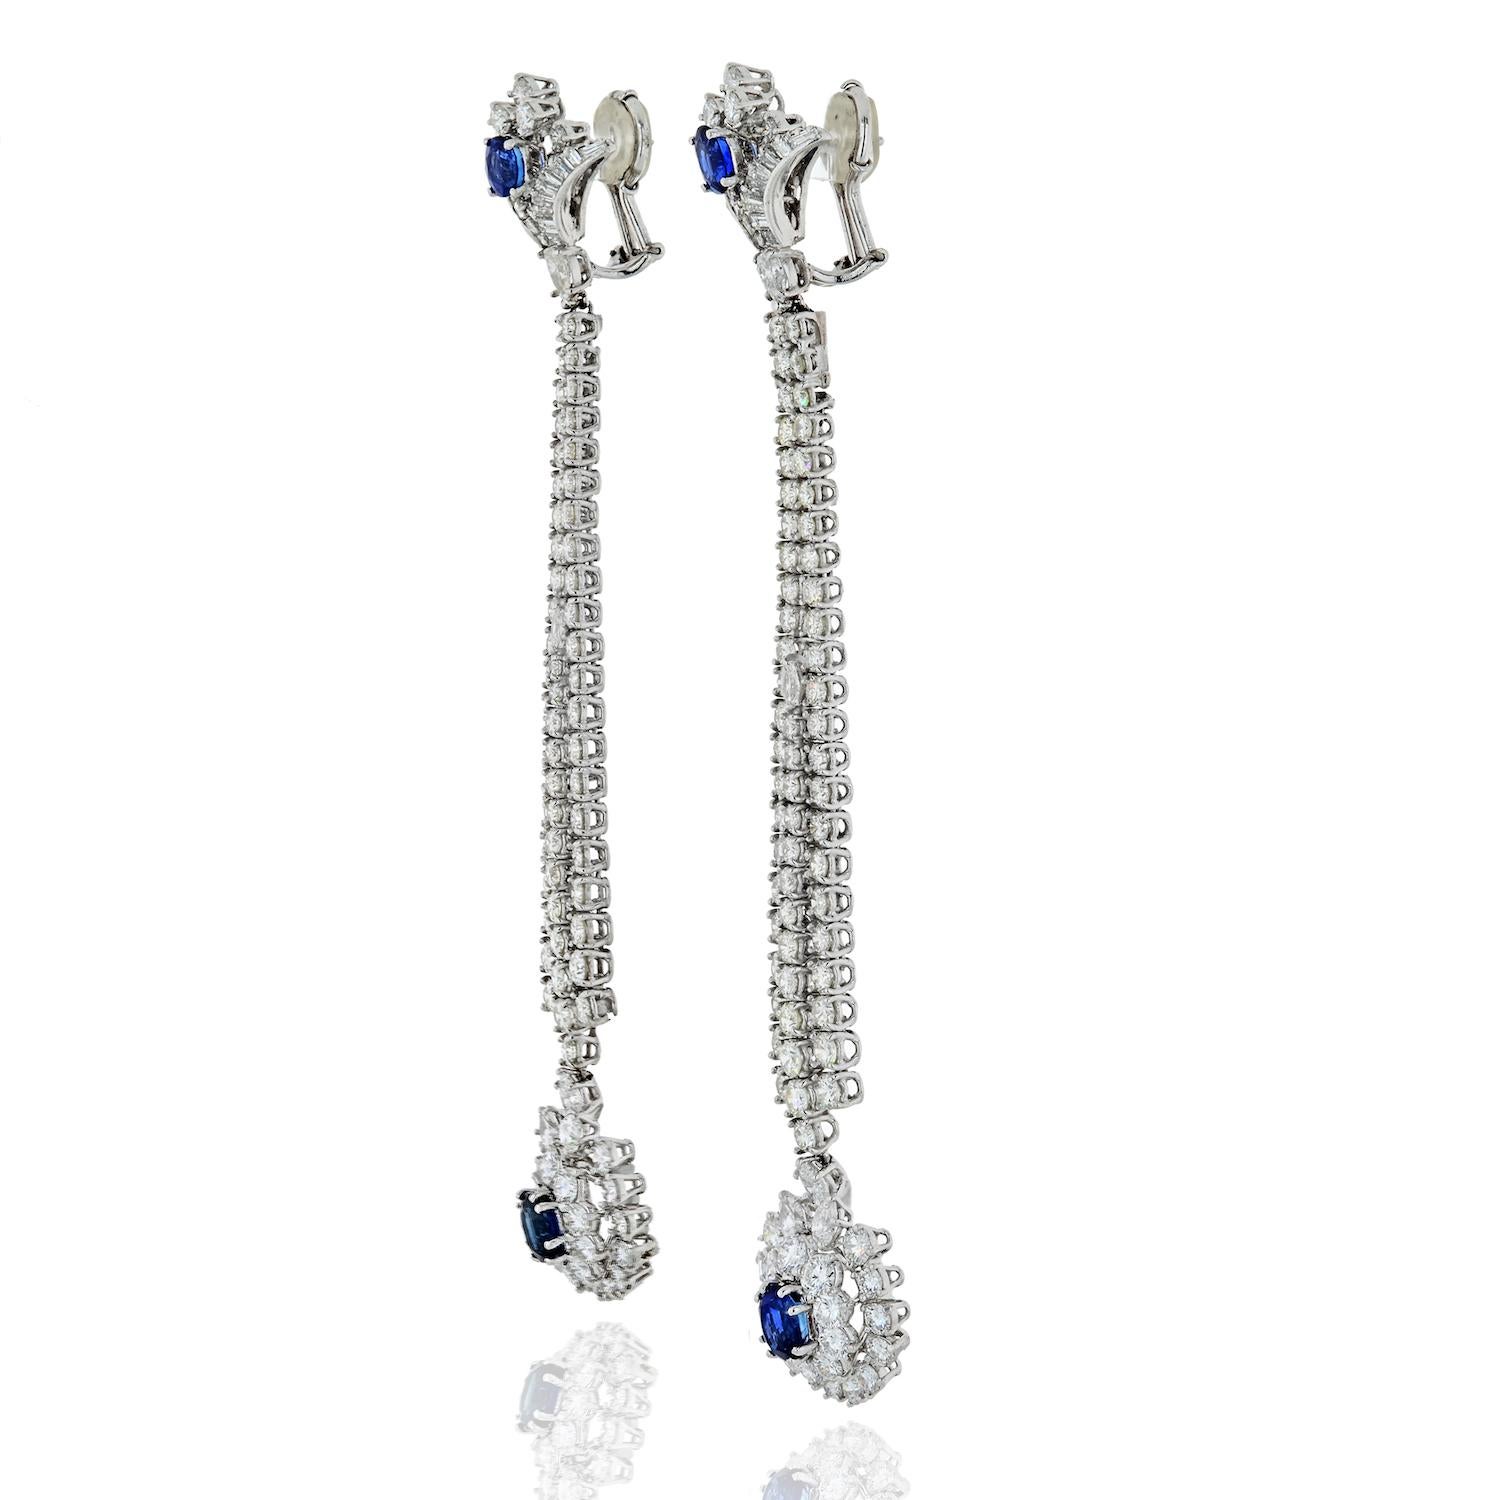 Elevate your evening look with these exquisite 18K white gold earrings, a true embodiment of elegance and sophistication. Measuring approximately 4.5 inches in length, these earrings are designed to make a statement and capture the essence of